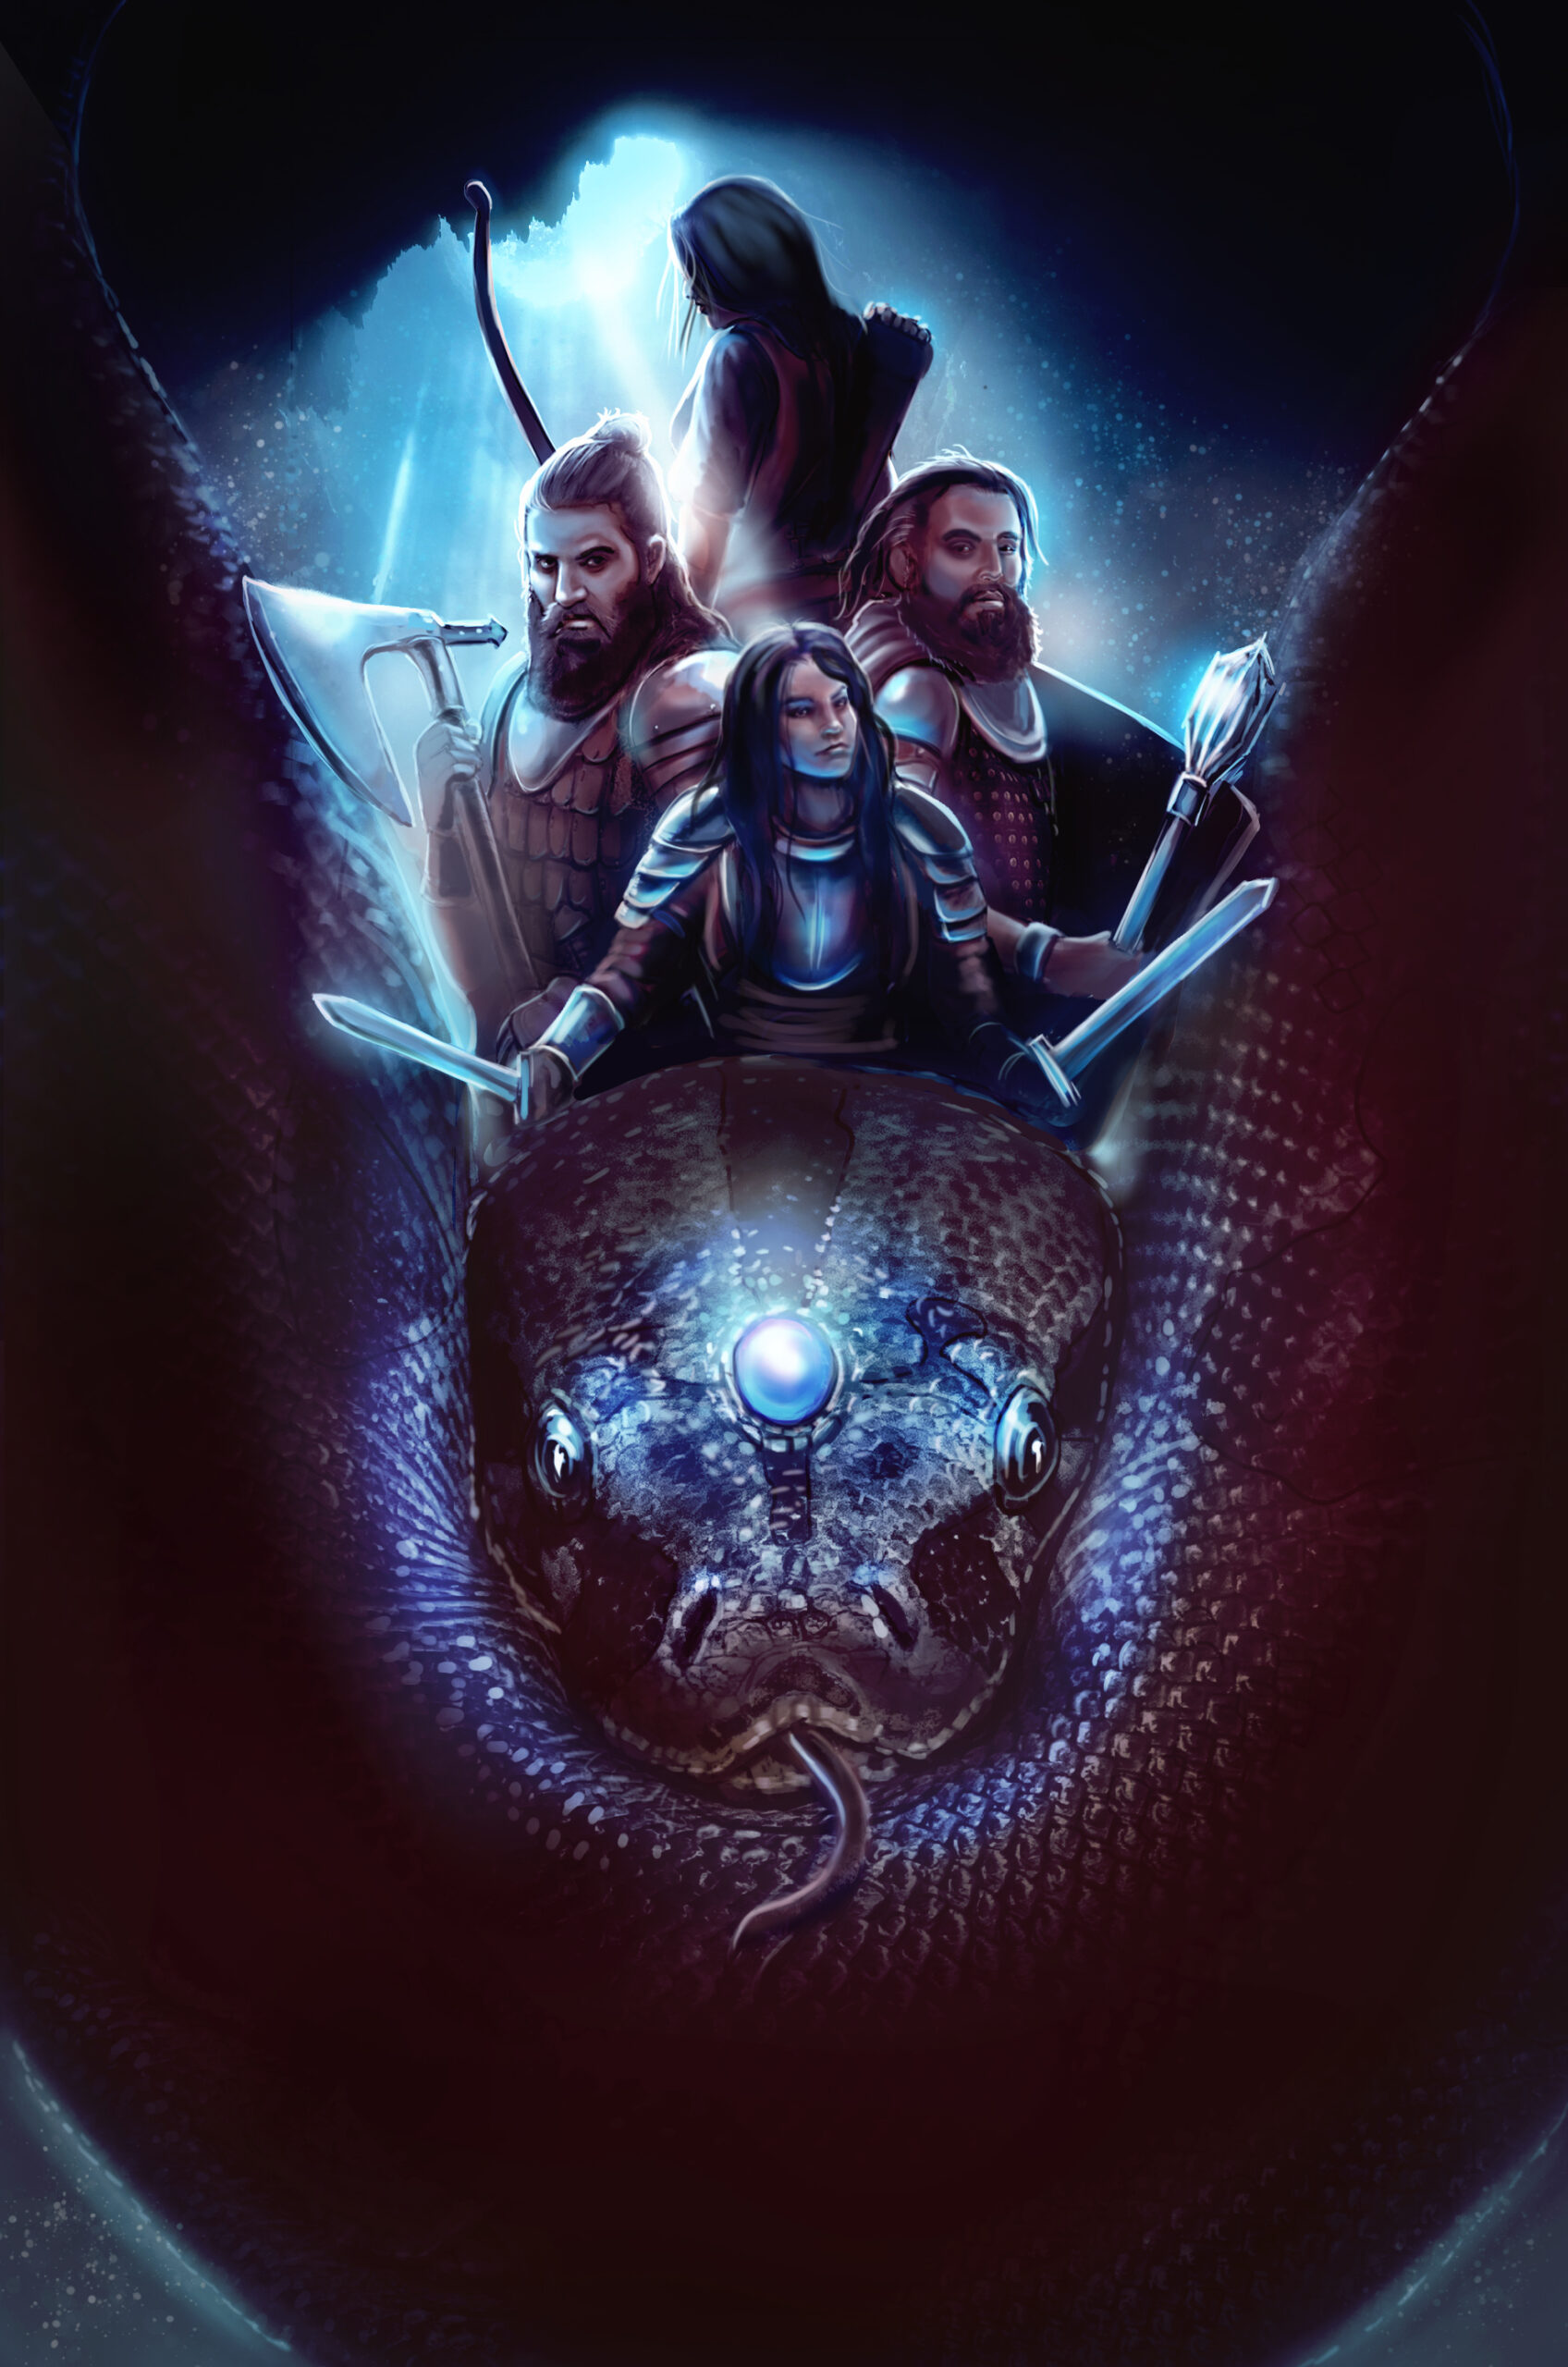 LitRPG art for a book cover by the noble artist. Featuring a fantasy adventuring party and a giant snake in a cavern underground.